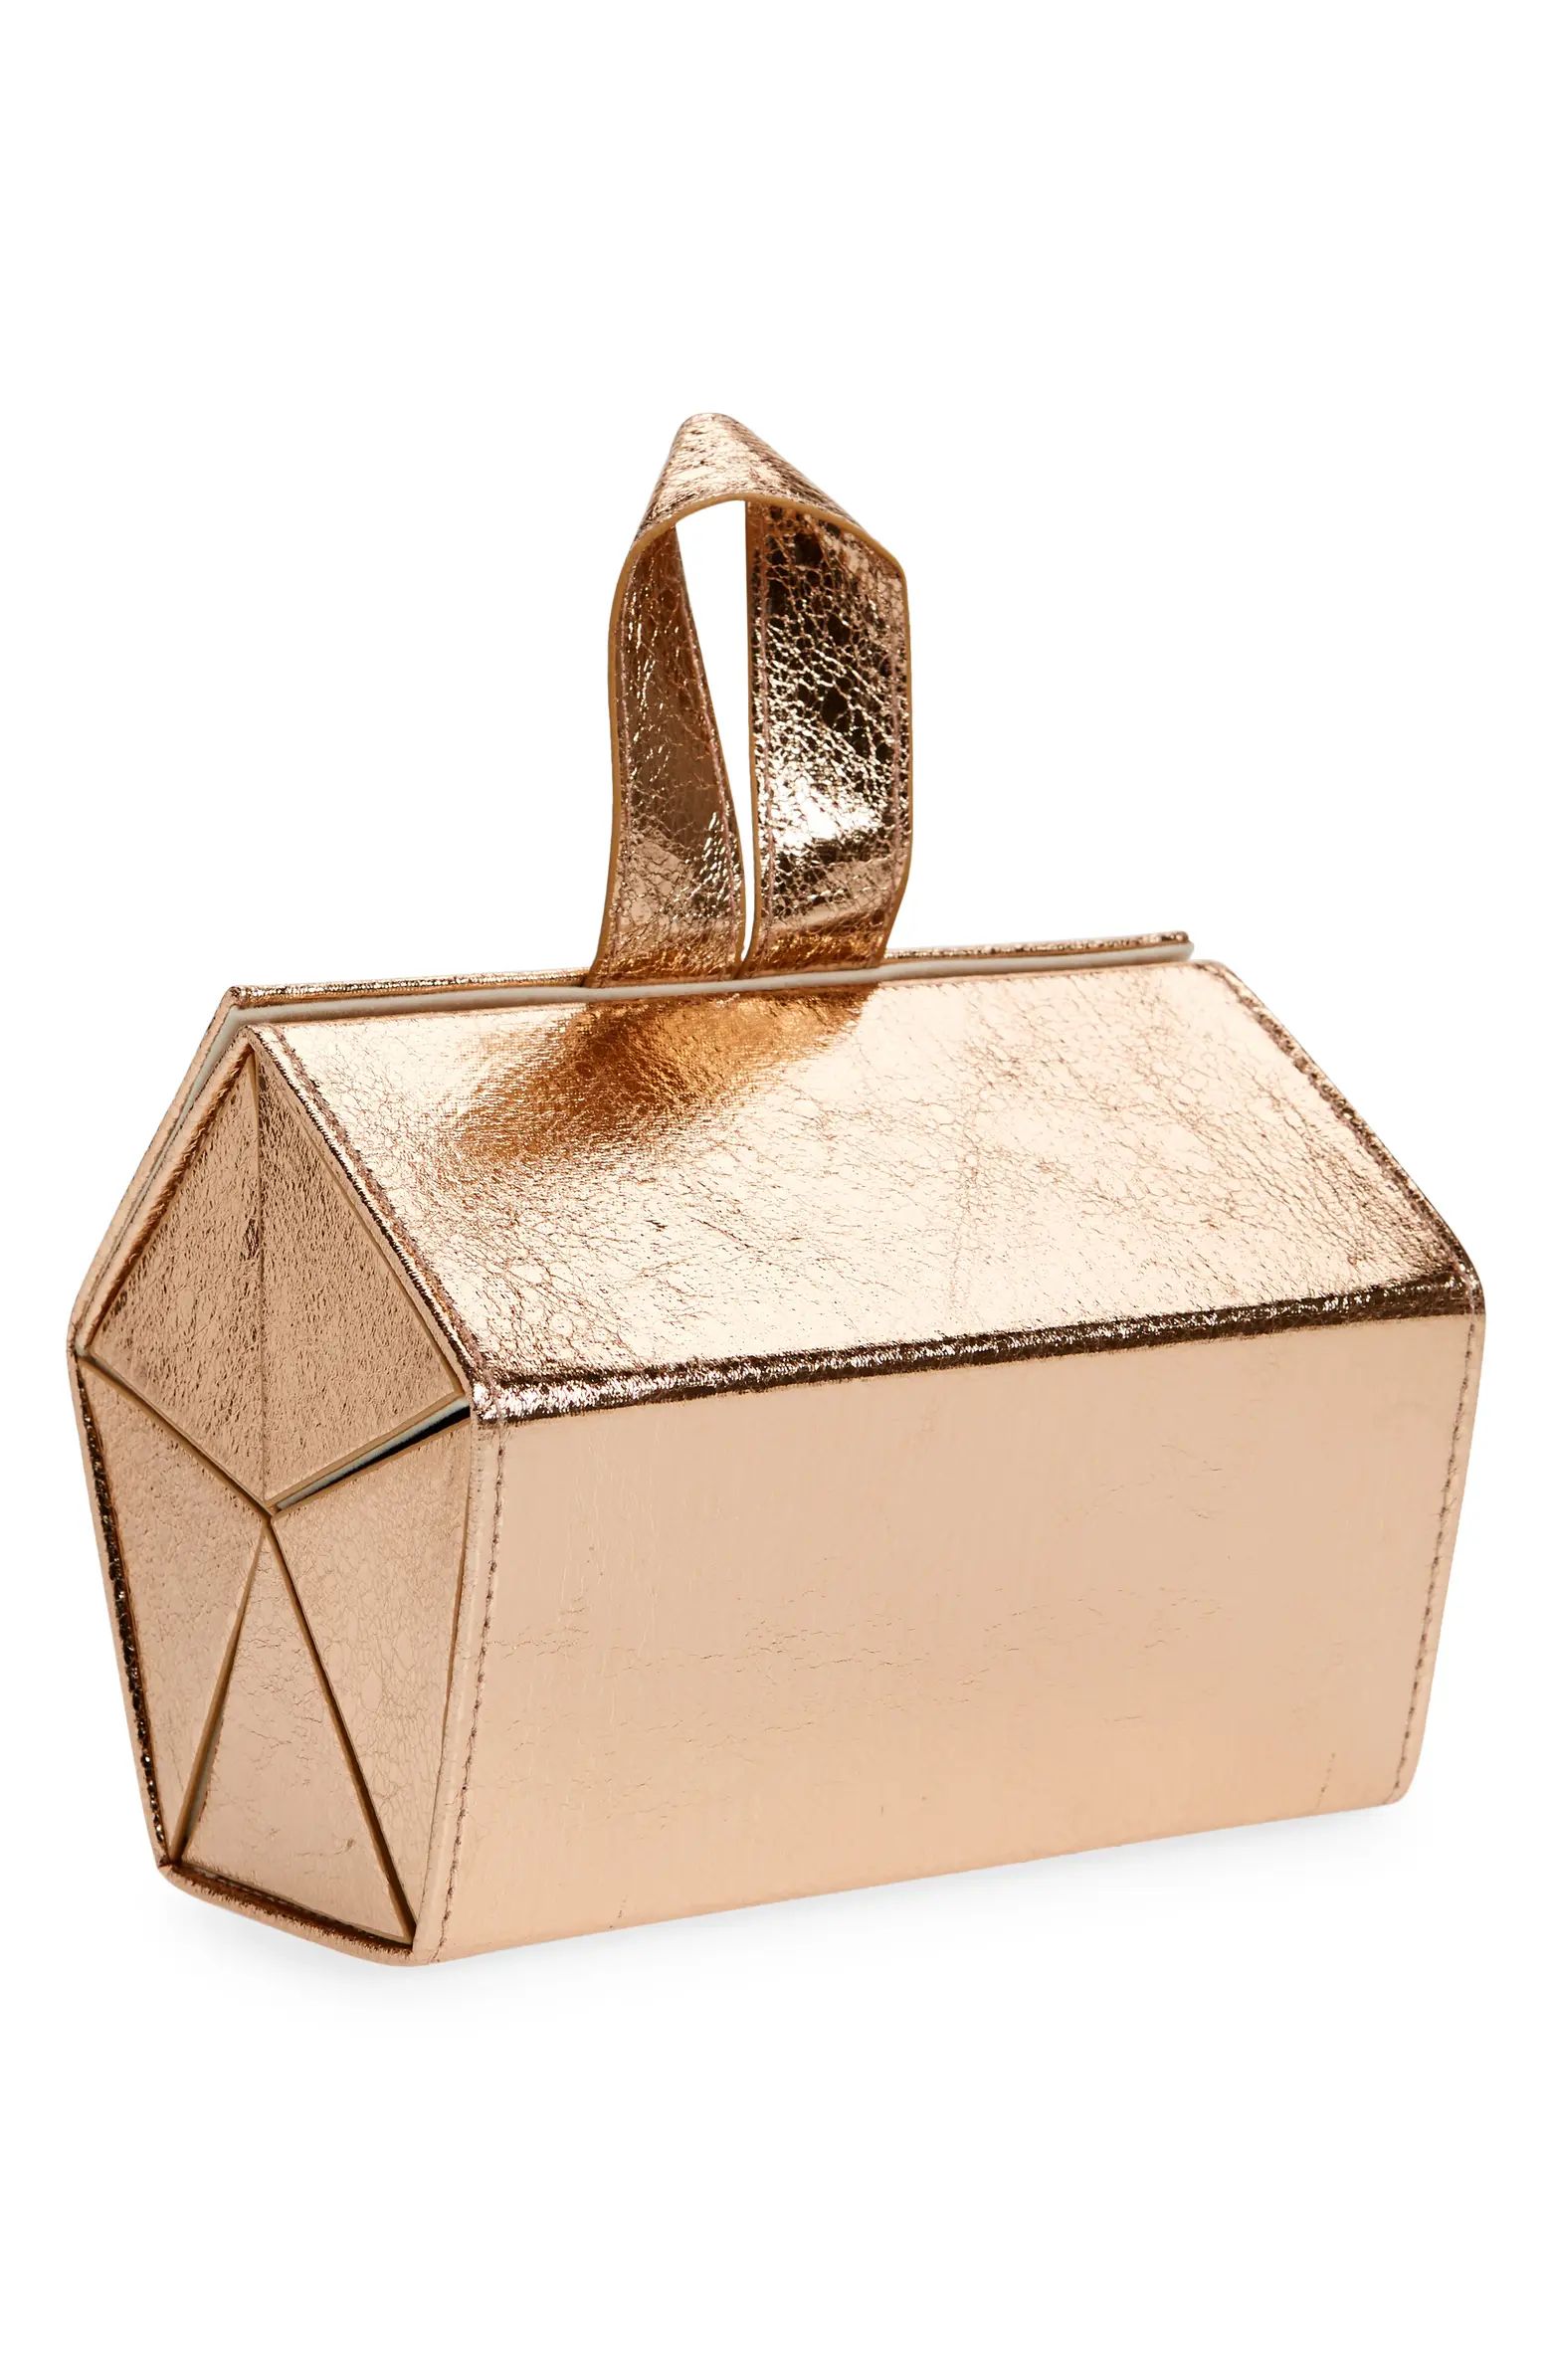 Hexagon Fold-Up Travel Jewelry Case | Nordstrom